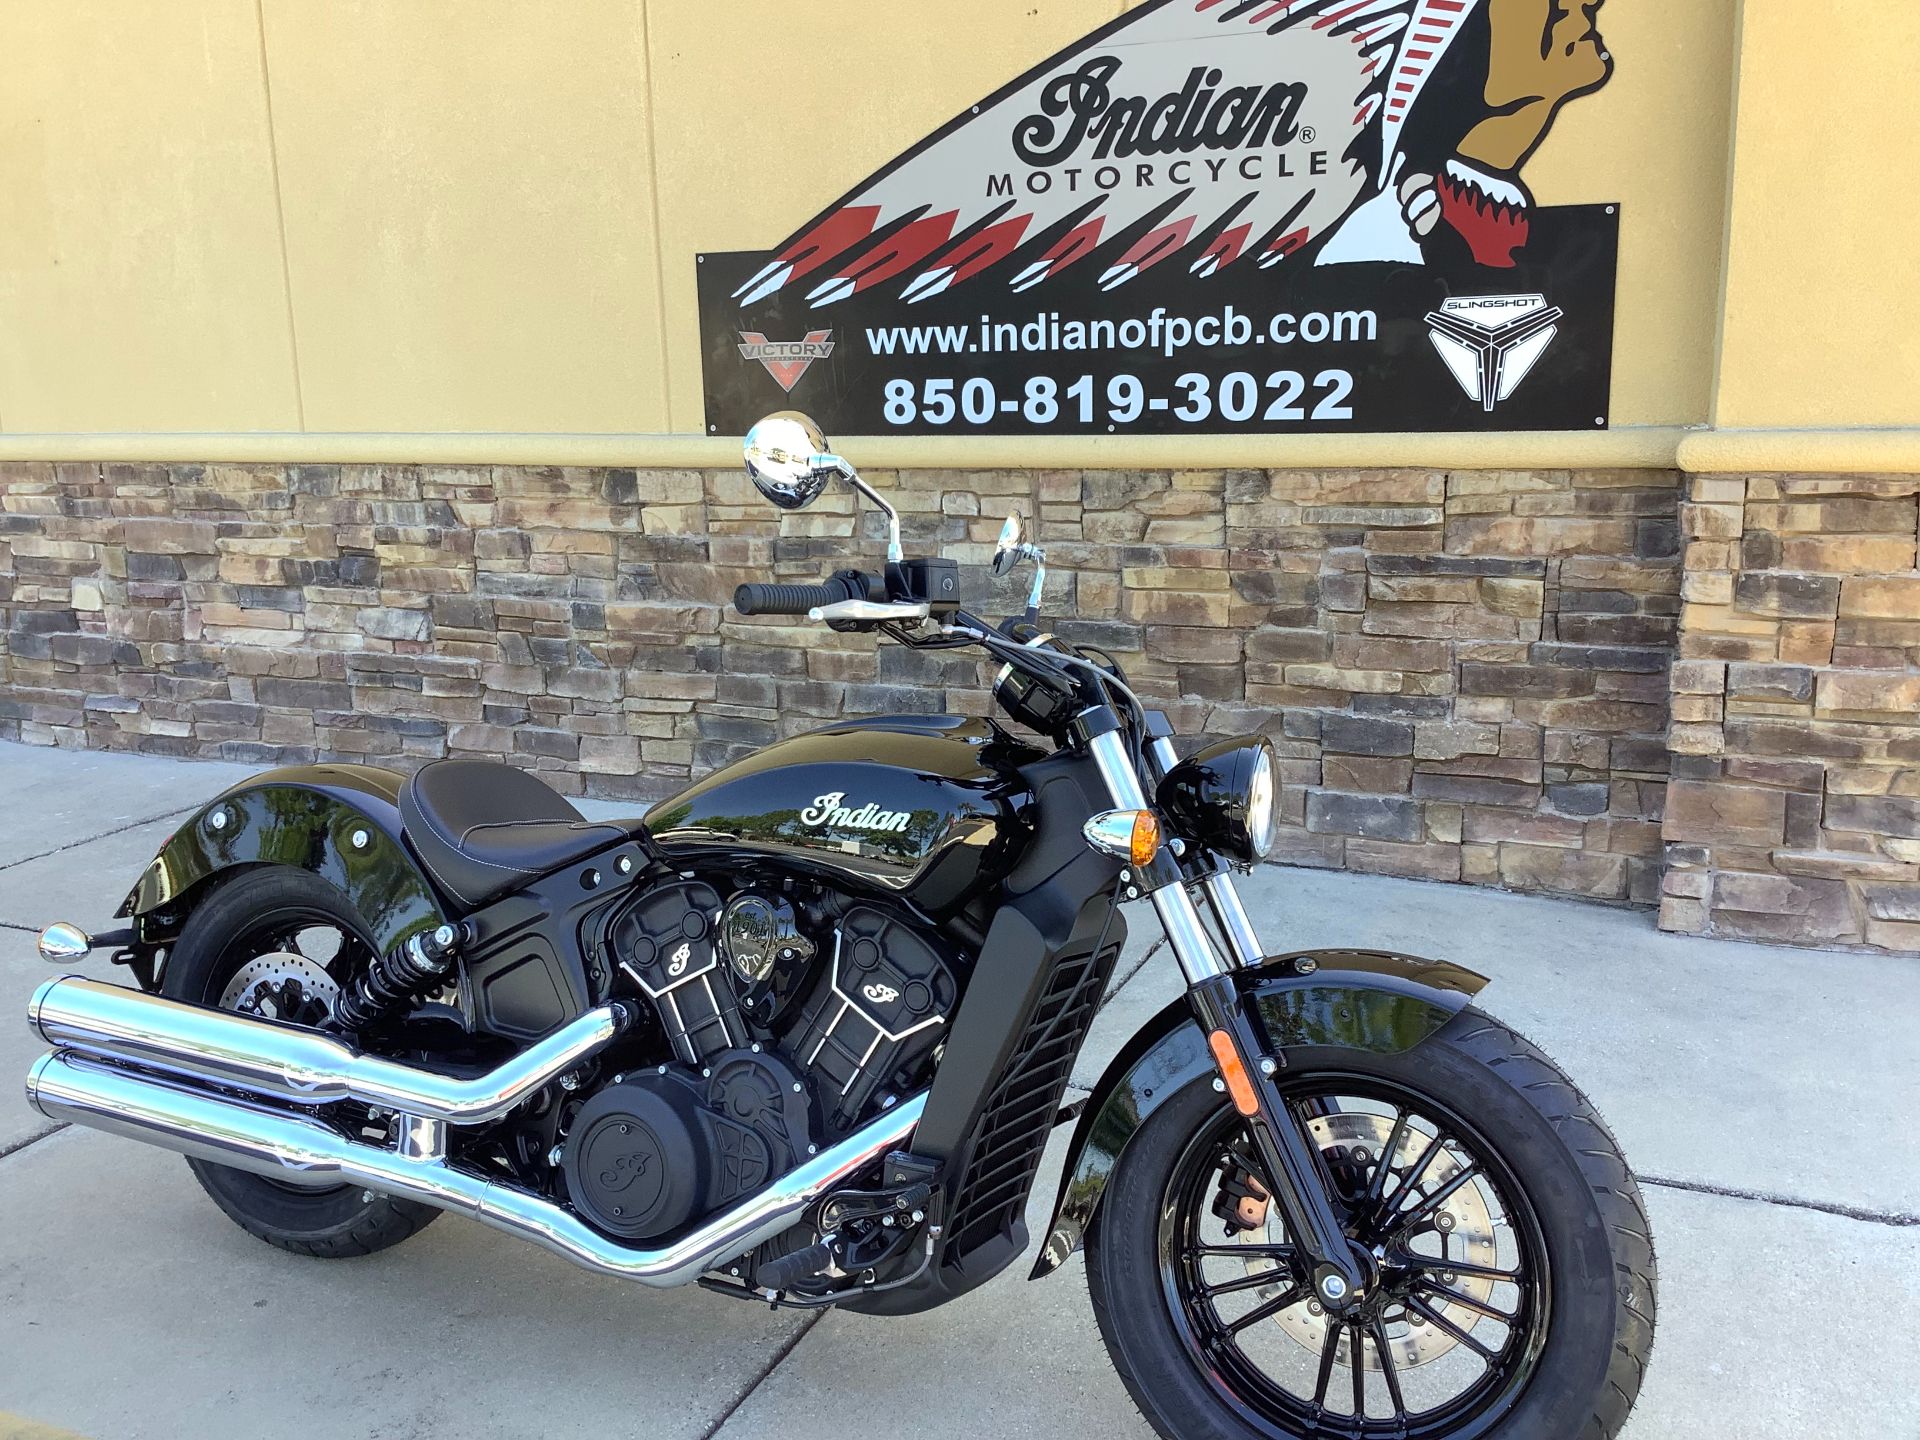 2022 Indian SCOUT 60 NON ABS in Panama City Beach, Florida - Photo 2